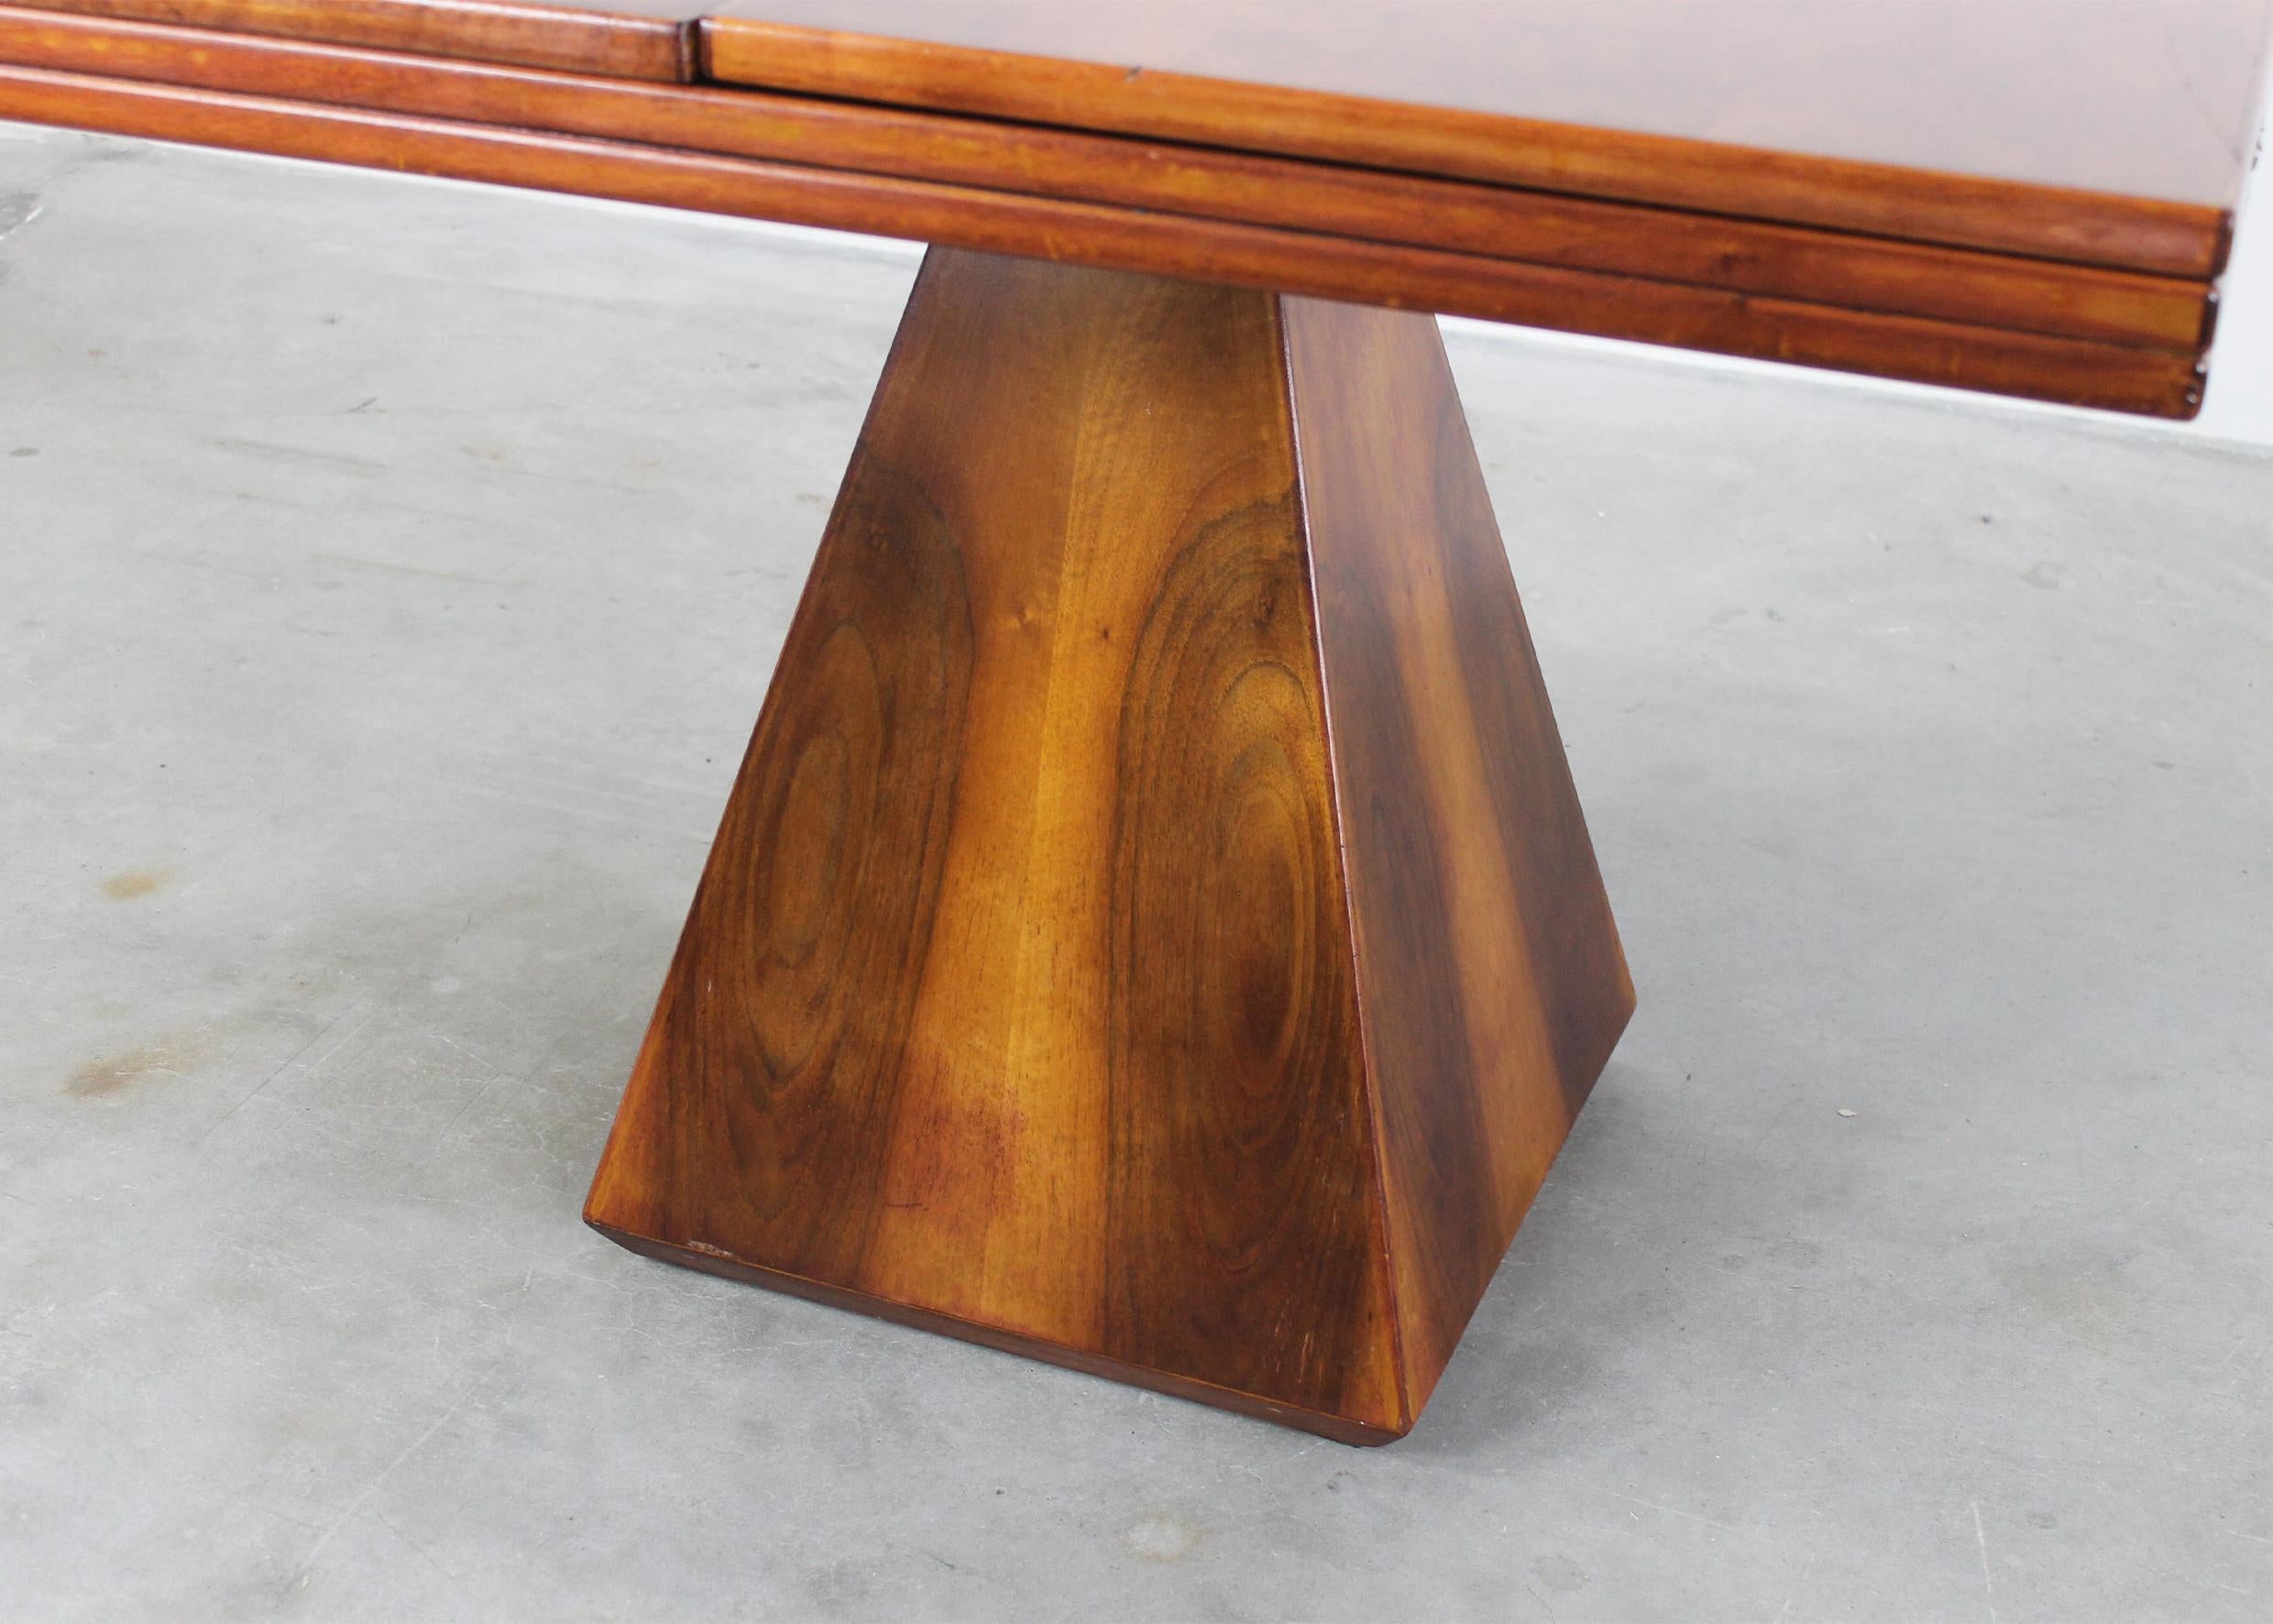 Metal Vittorio Introini Chelsea Extendable Table in Walnut Wood by Saporiti 1960s For Sale